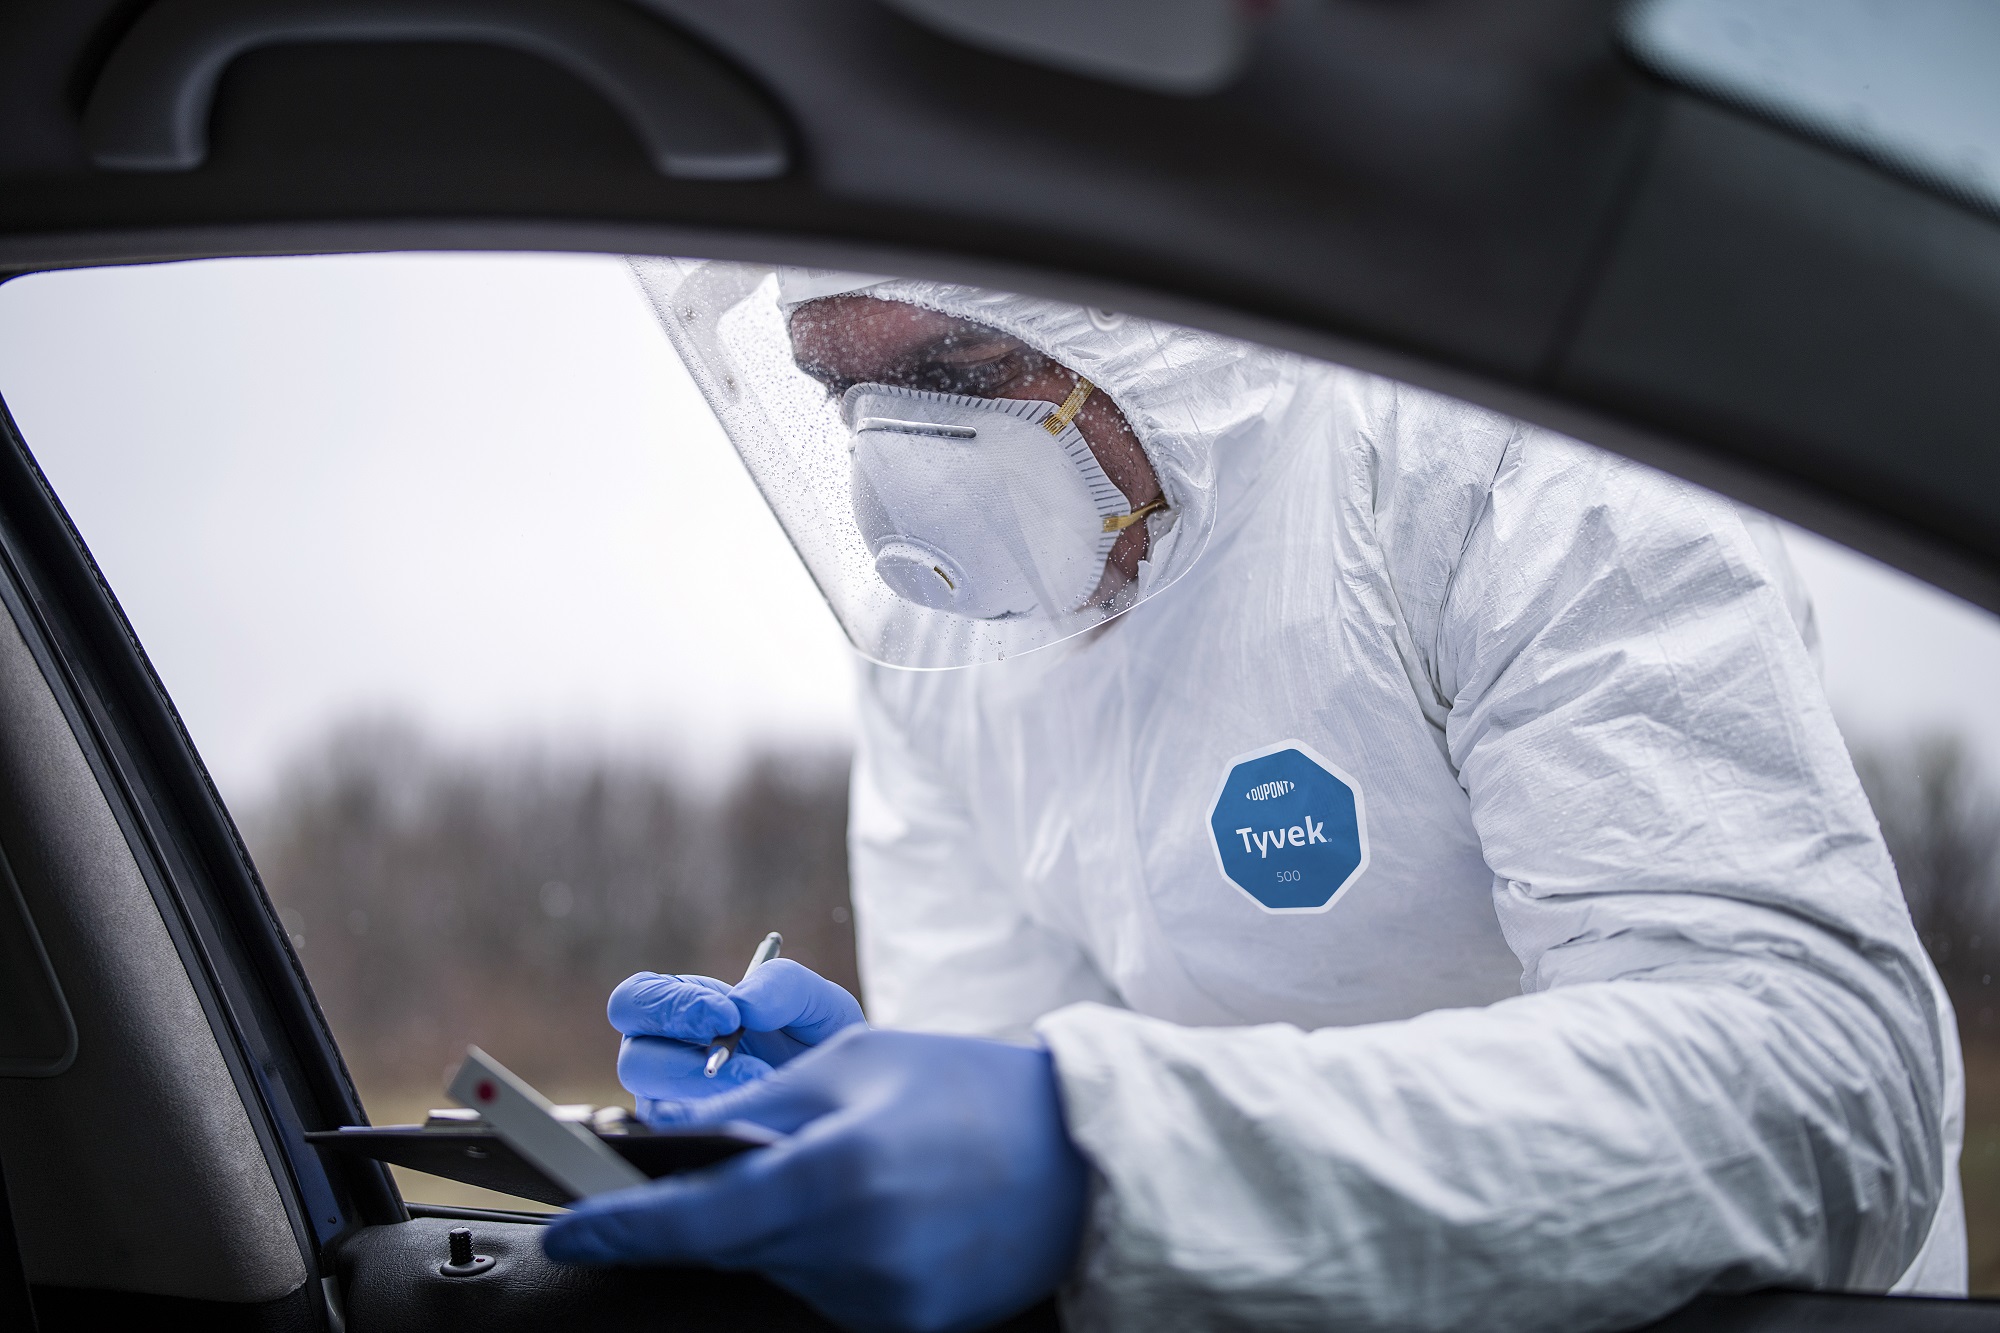 DuPont's Tyvek coveralls are used for Covid-19 testing. (Image: GettyImages)